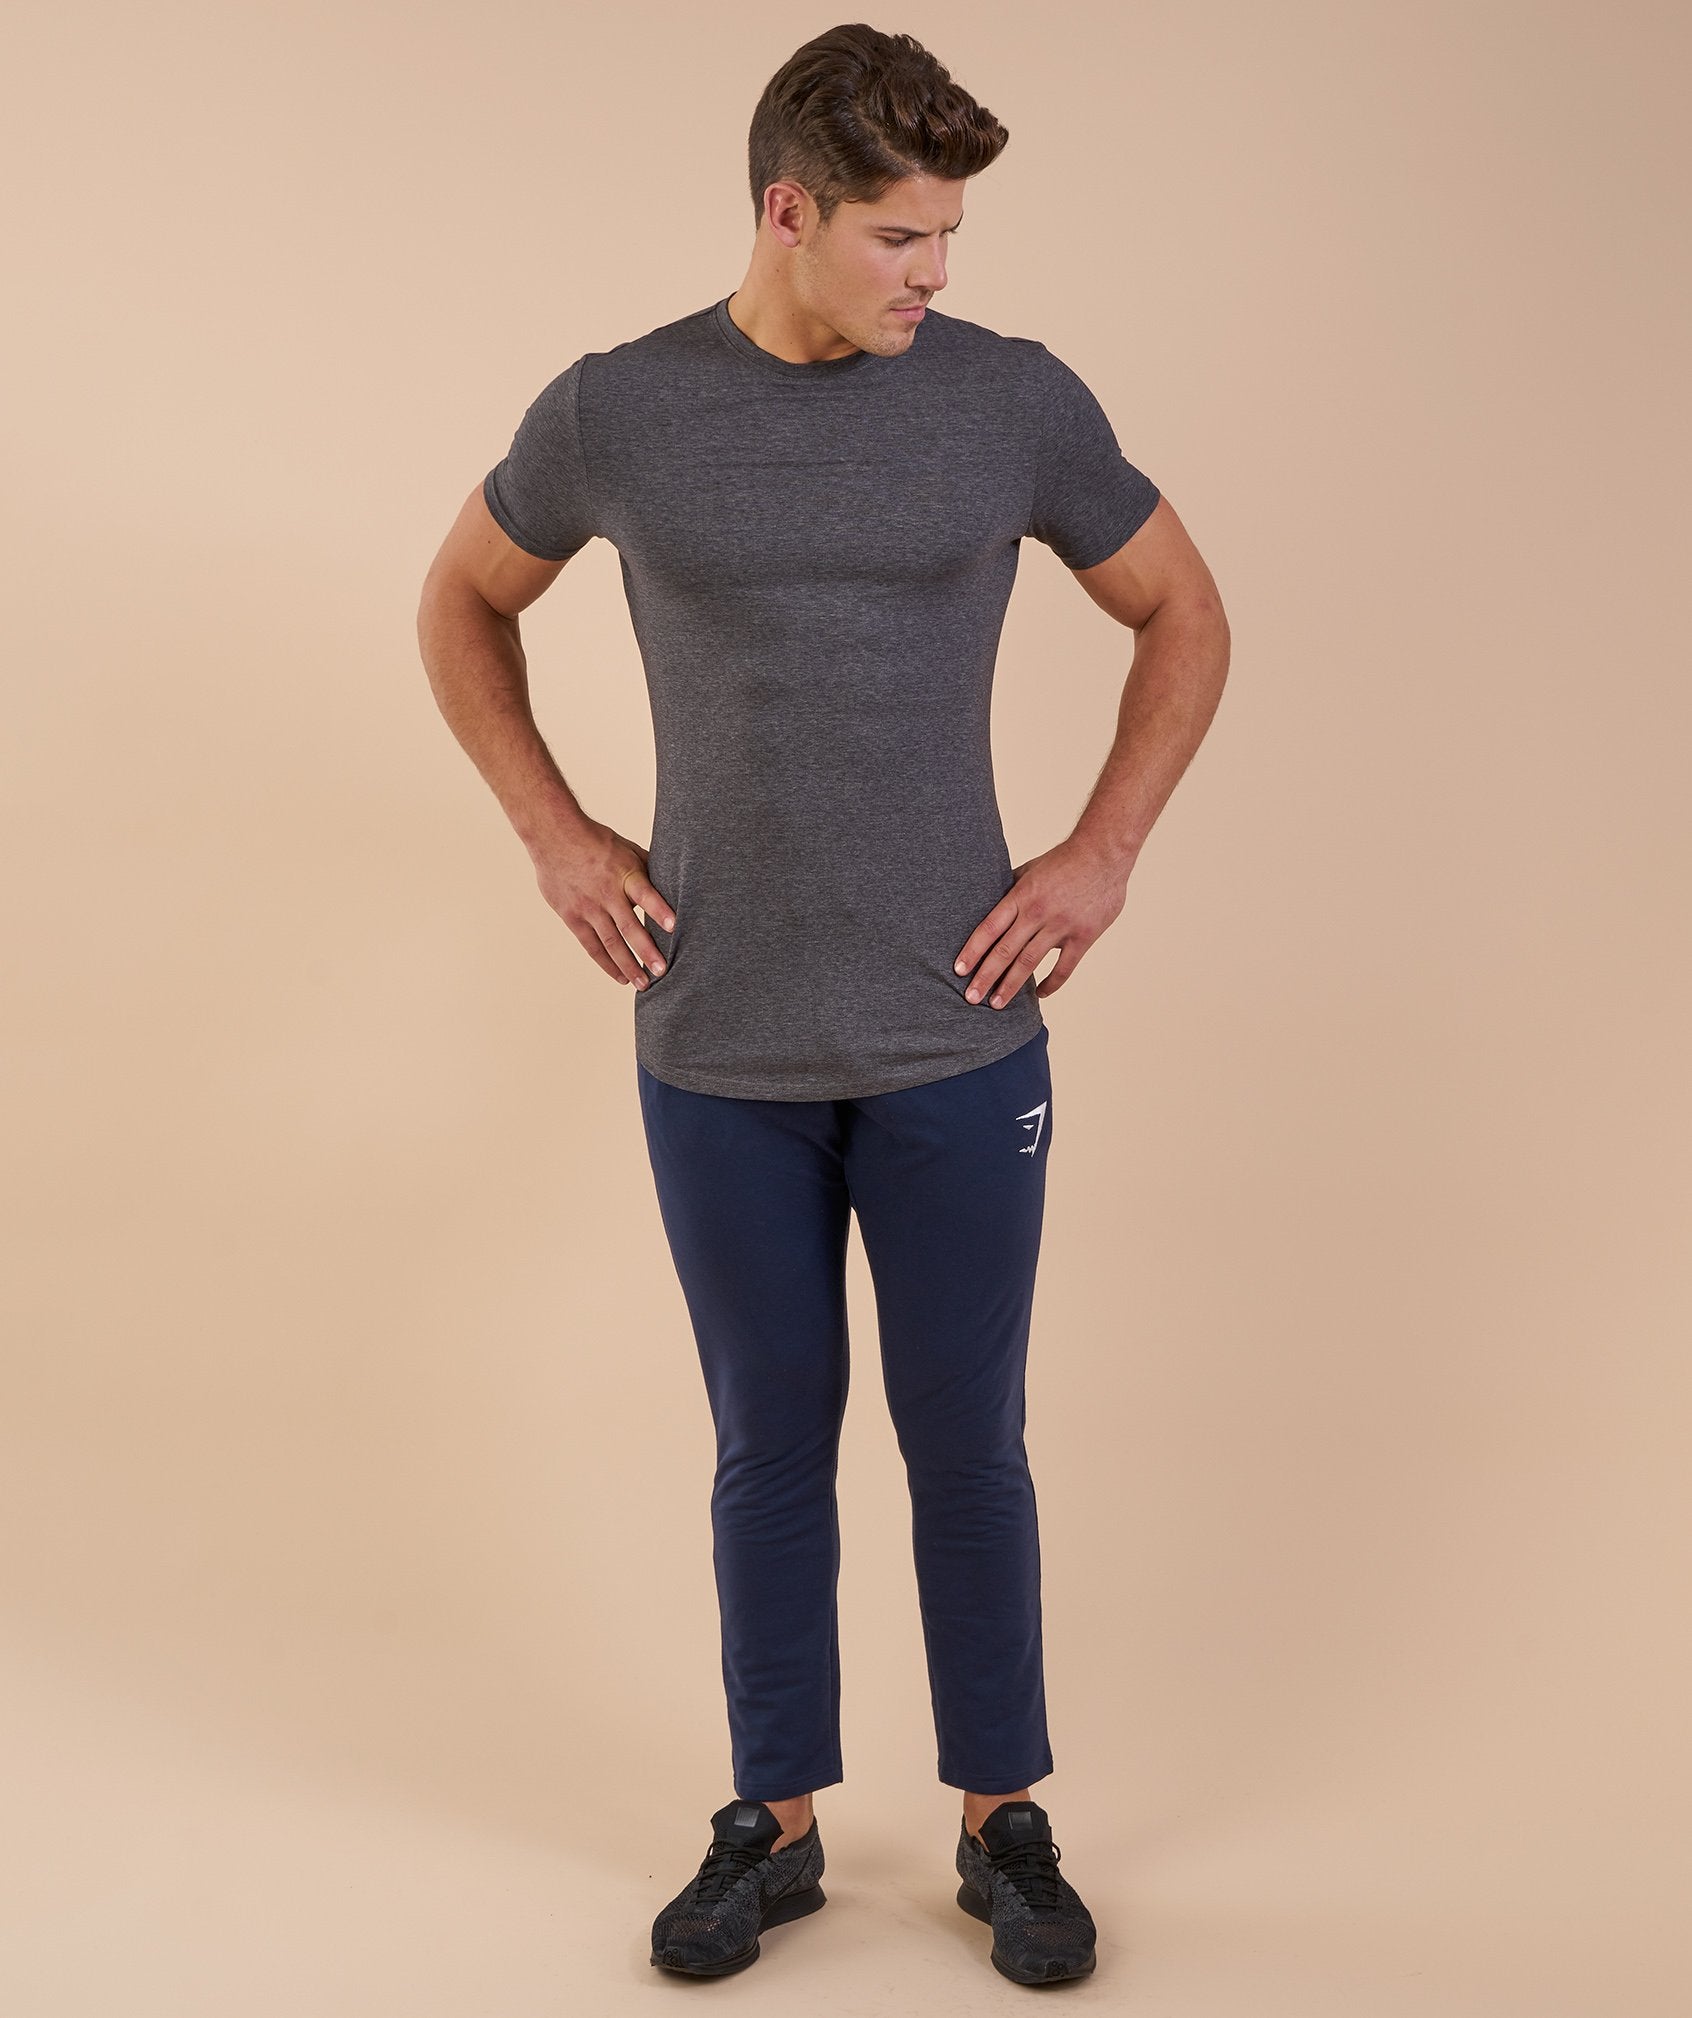 Solace Longline T-Shirt in Charcoal Marl - view 2